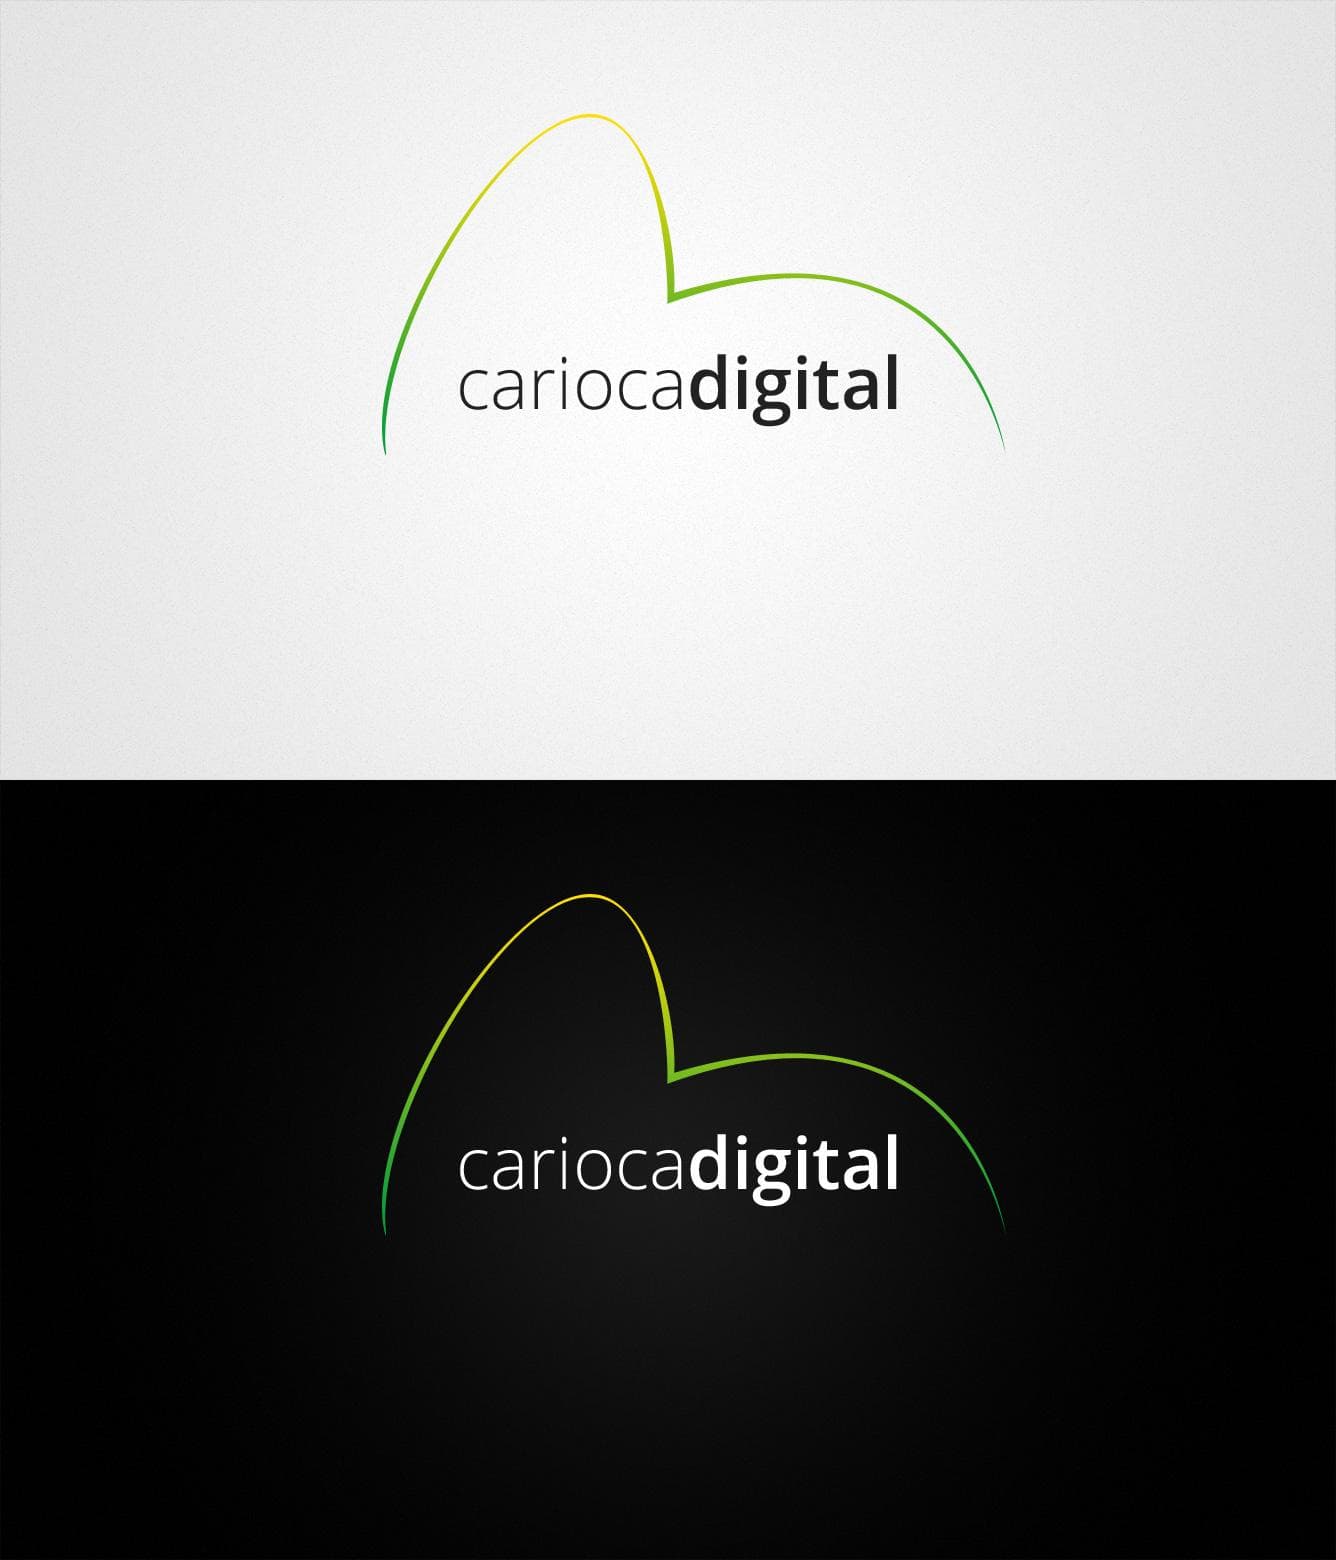 Carioca Digital logo displayed with both dark and light backgrounds